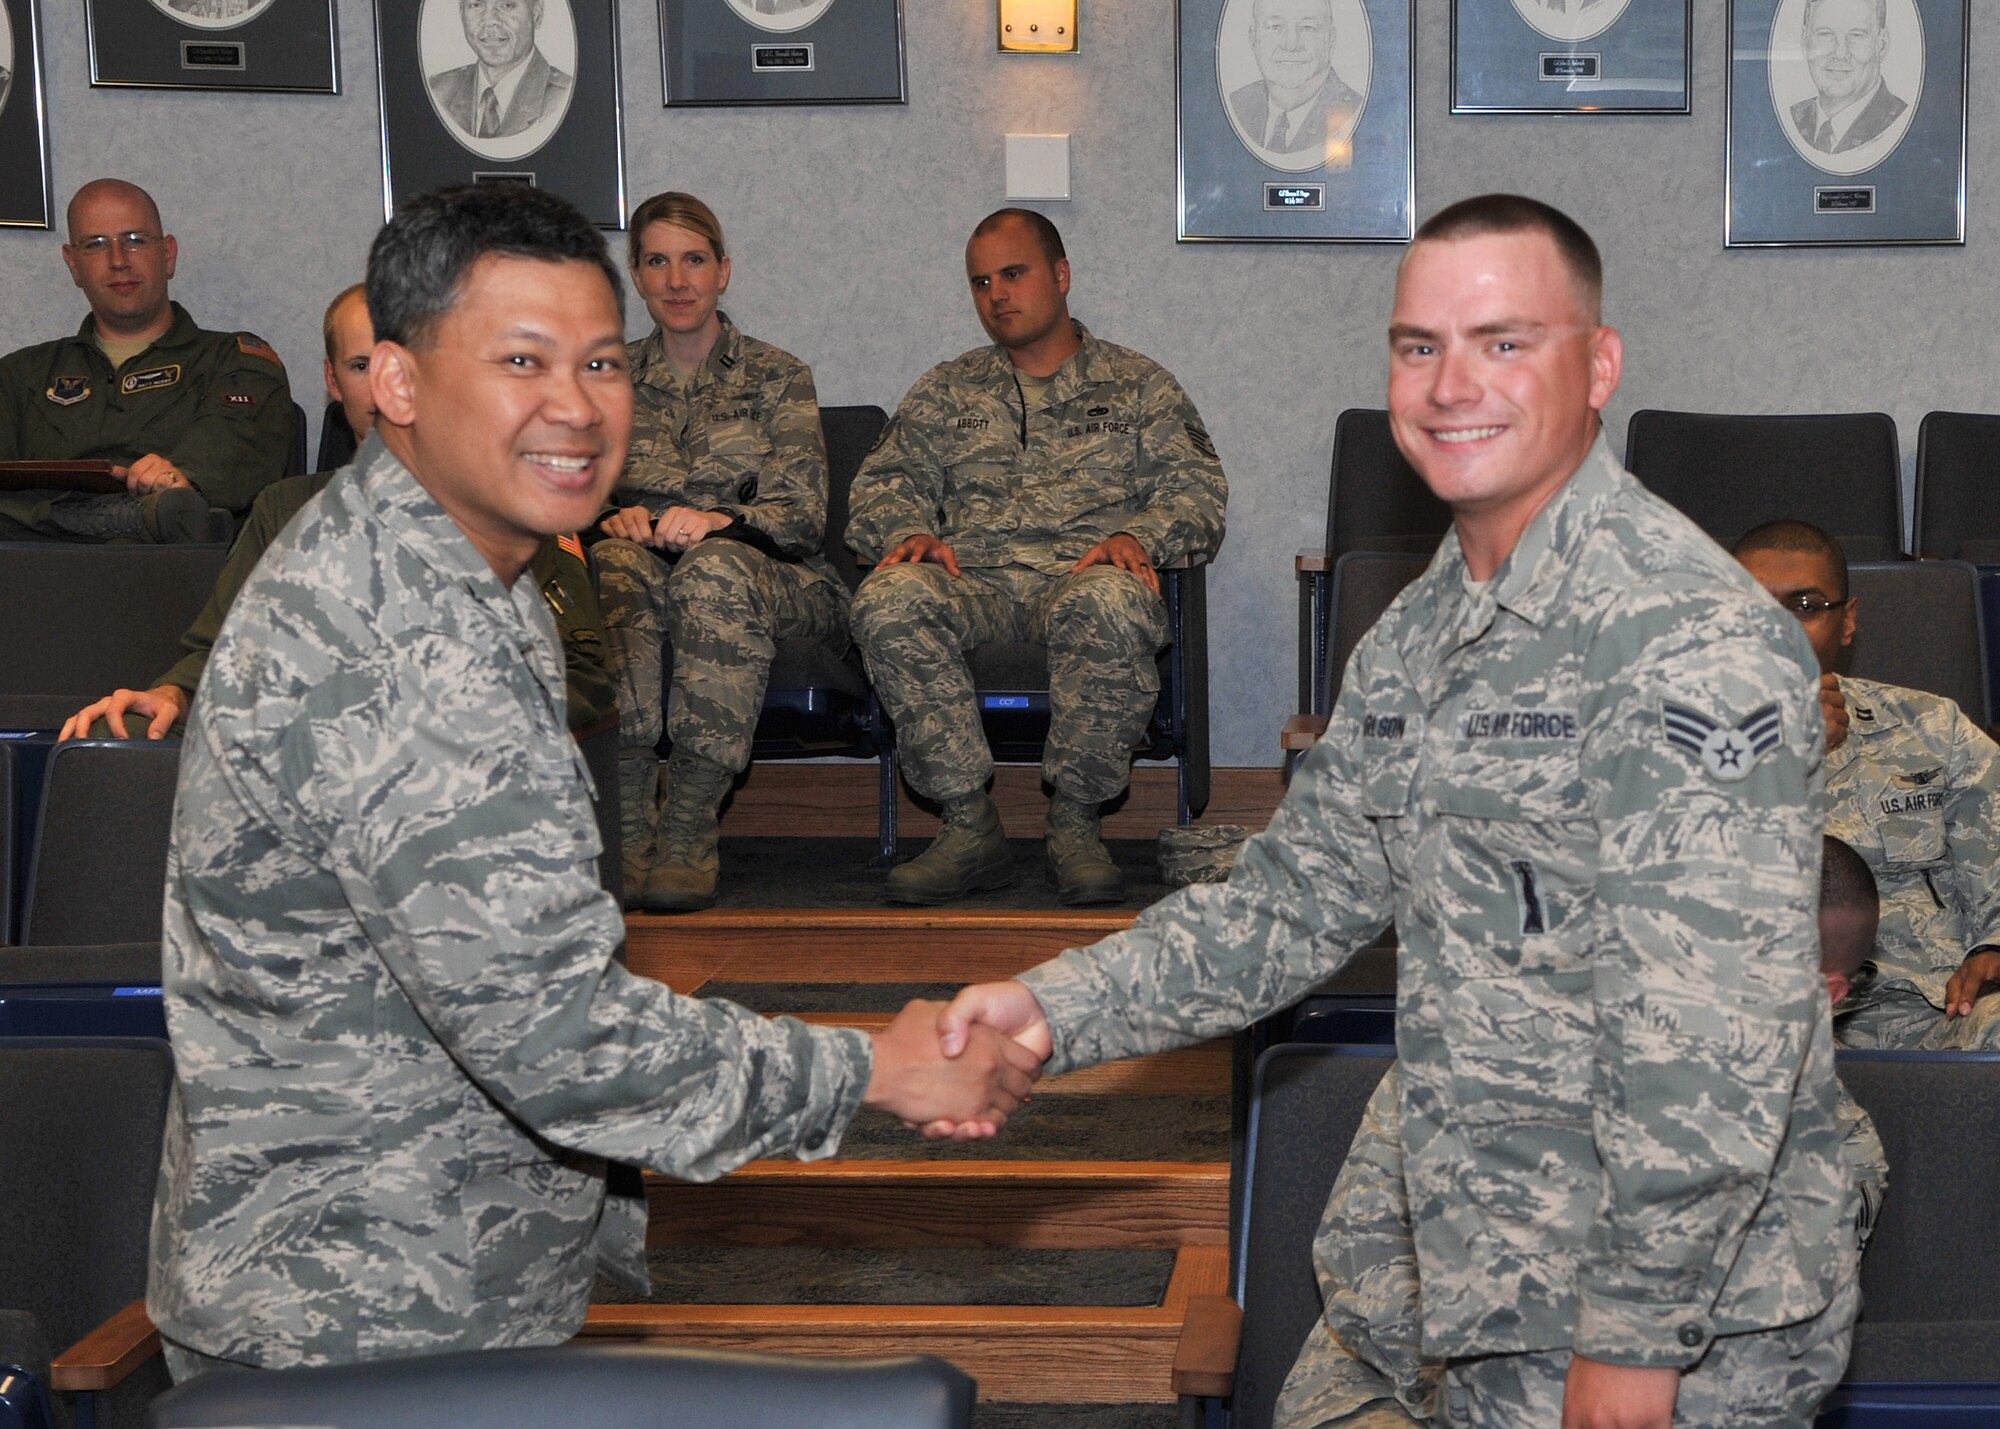 Col. H.B. Brual, 341st Missile Wing commander, left, presents Senior Airman Cory Carlson, 341st Missile Maintenance Squadron technician, with a coin recognizing Carlson’s 100th safe trip to the missile complex in a payload transporter June 27 in the wing conference room.  (U.S. Air Force photo/John Turner)